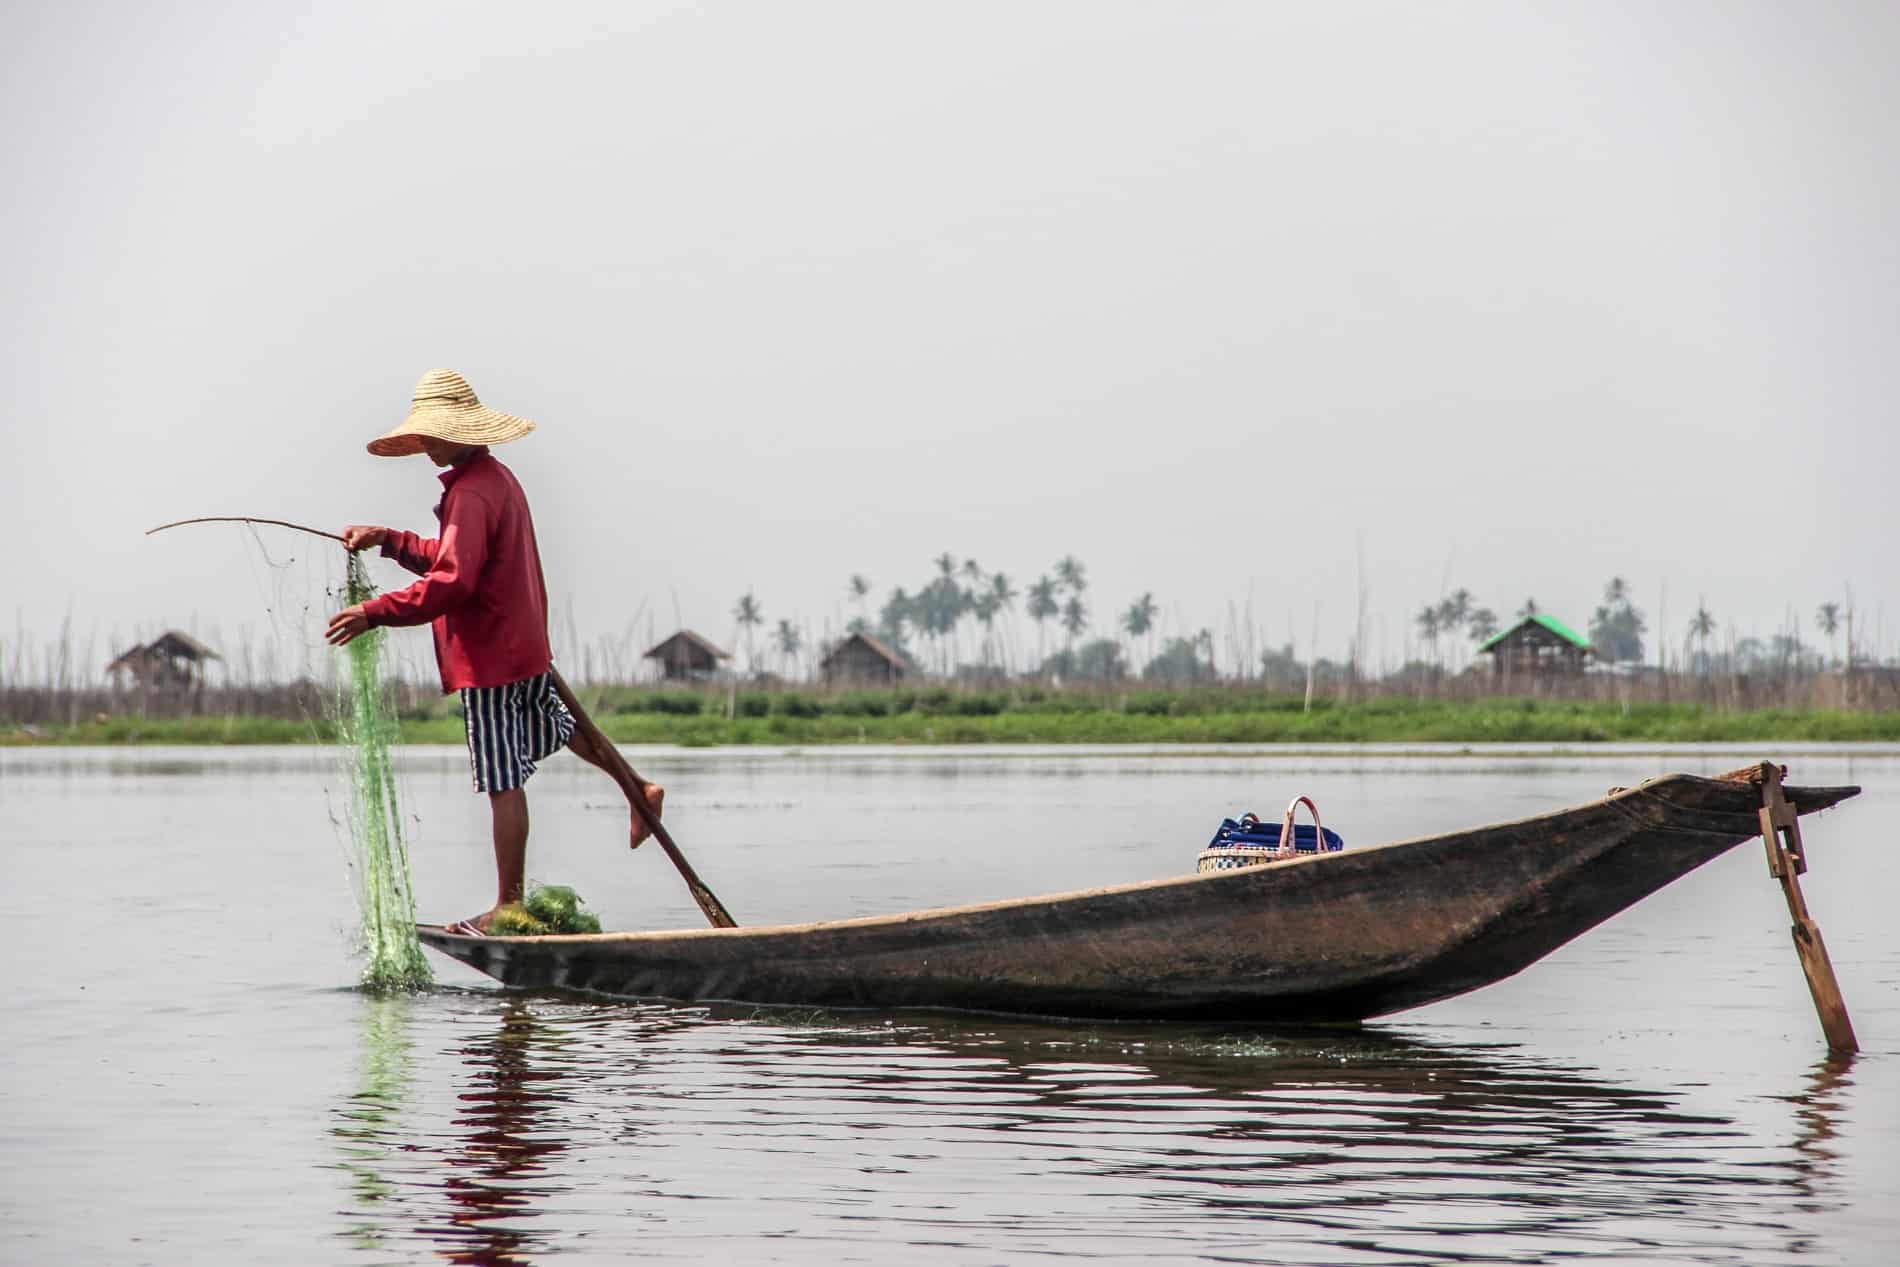 A fisherman in a red top, stripy shorts and a straw hat on Inle Lake in Myanmar practicing the traditional method of rowing the oar with one leg.